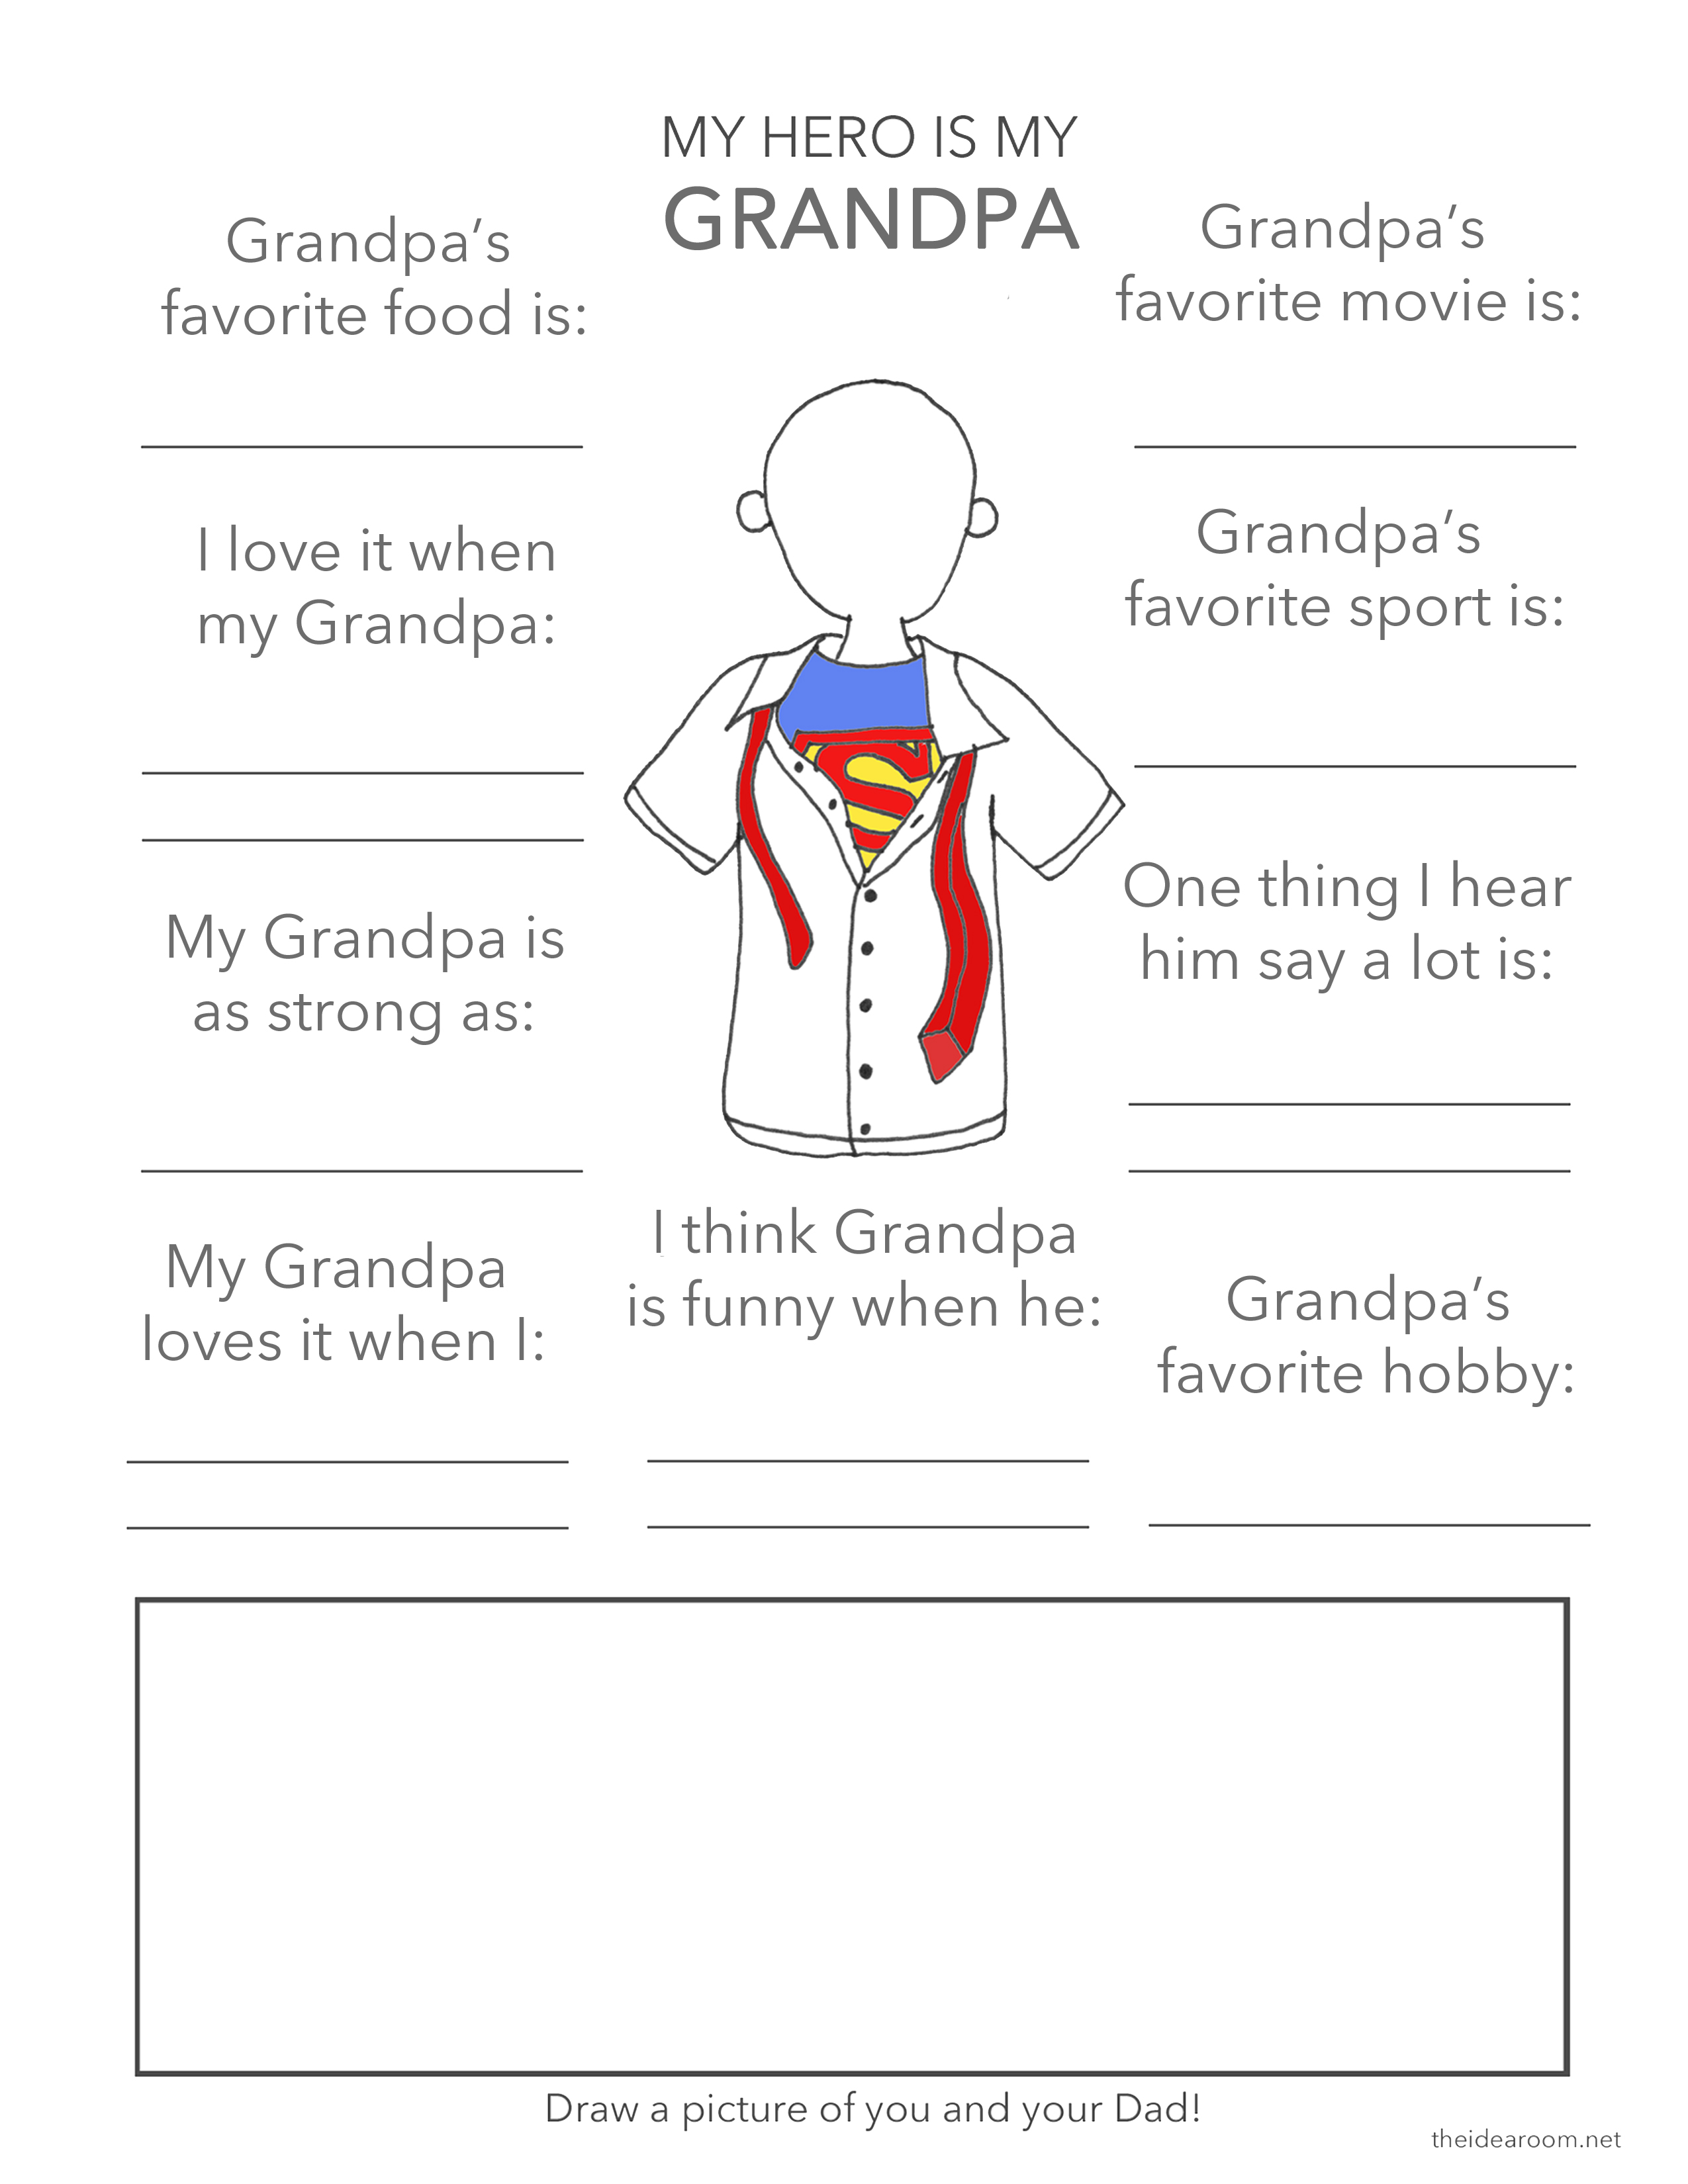 grandpa-free-printable-father-s-day-questionnaire-347-svg-file-cut